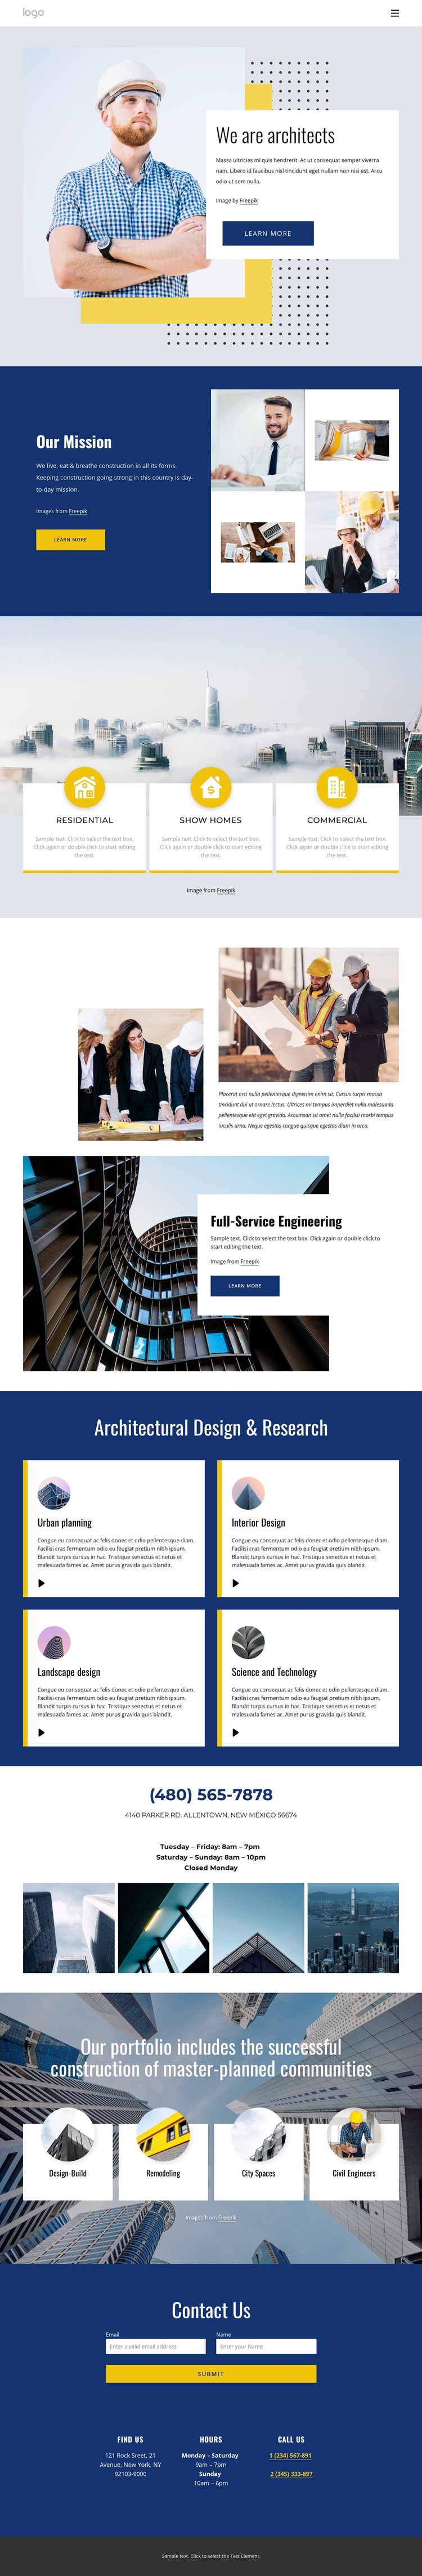 Architectural projects Website Design